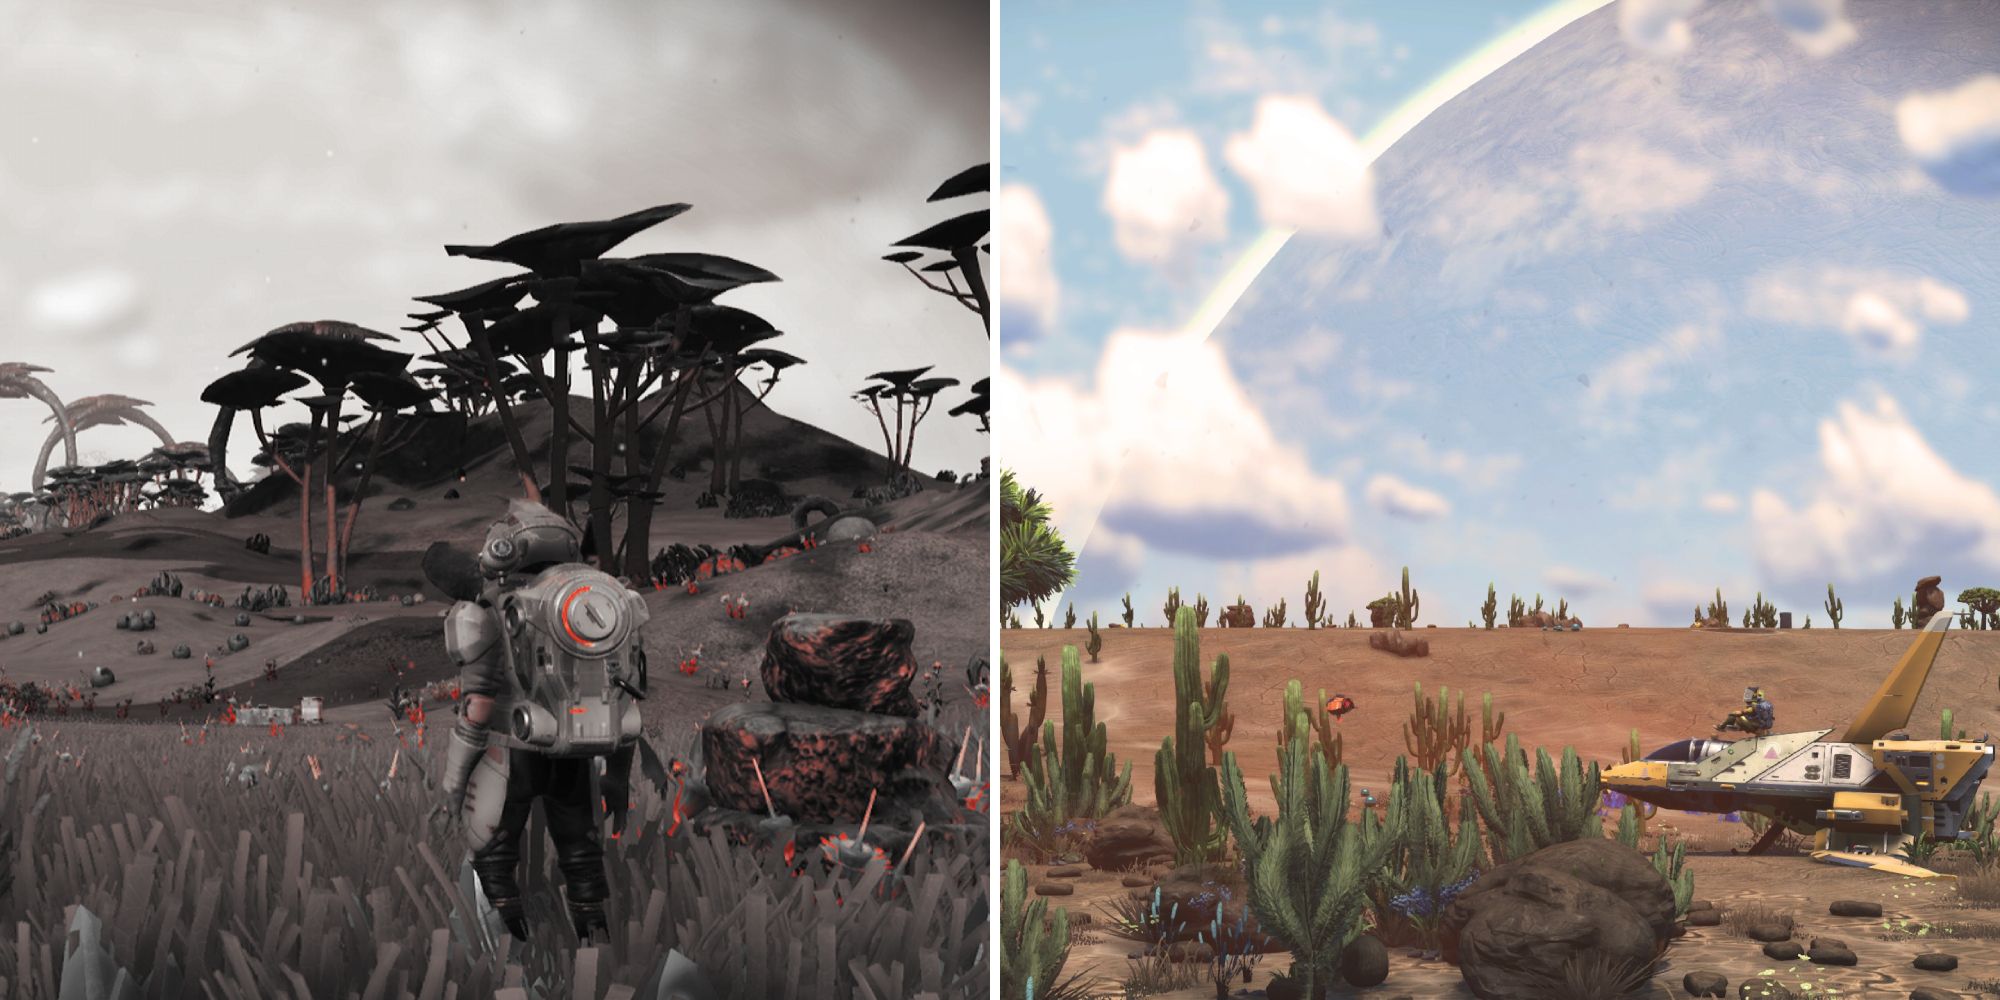 A split image from No Man's Sky featuring the playable character exploring two different planets, a barren desert and a strange black-and-white exotic landscape.